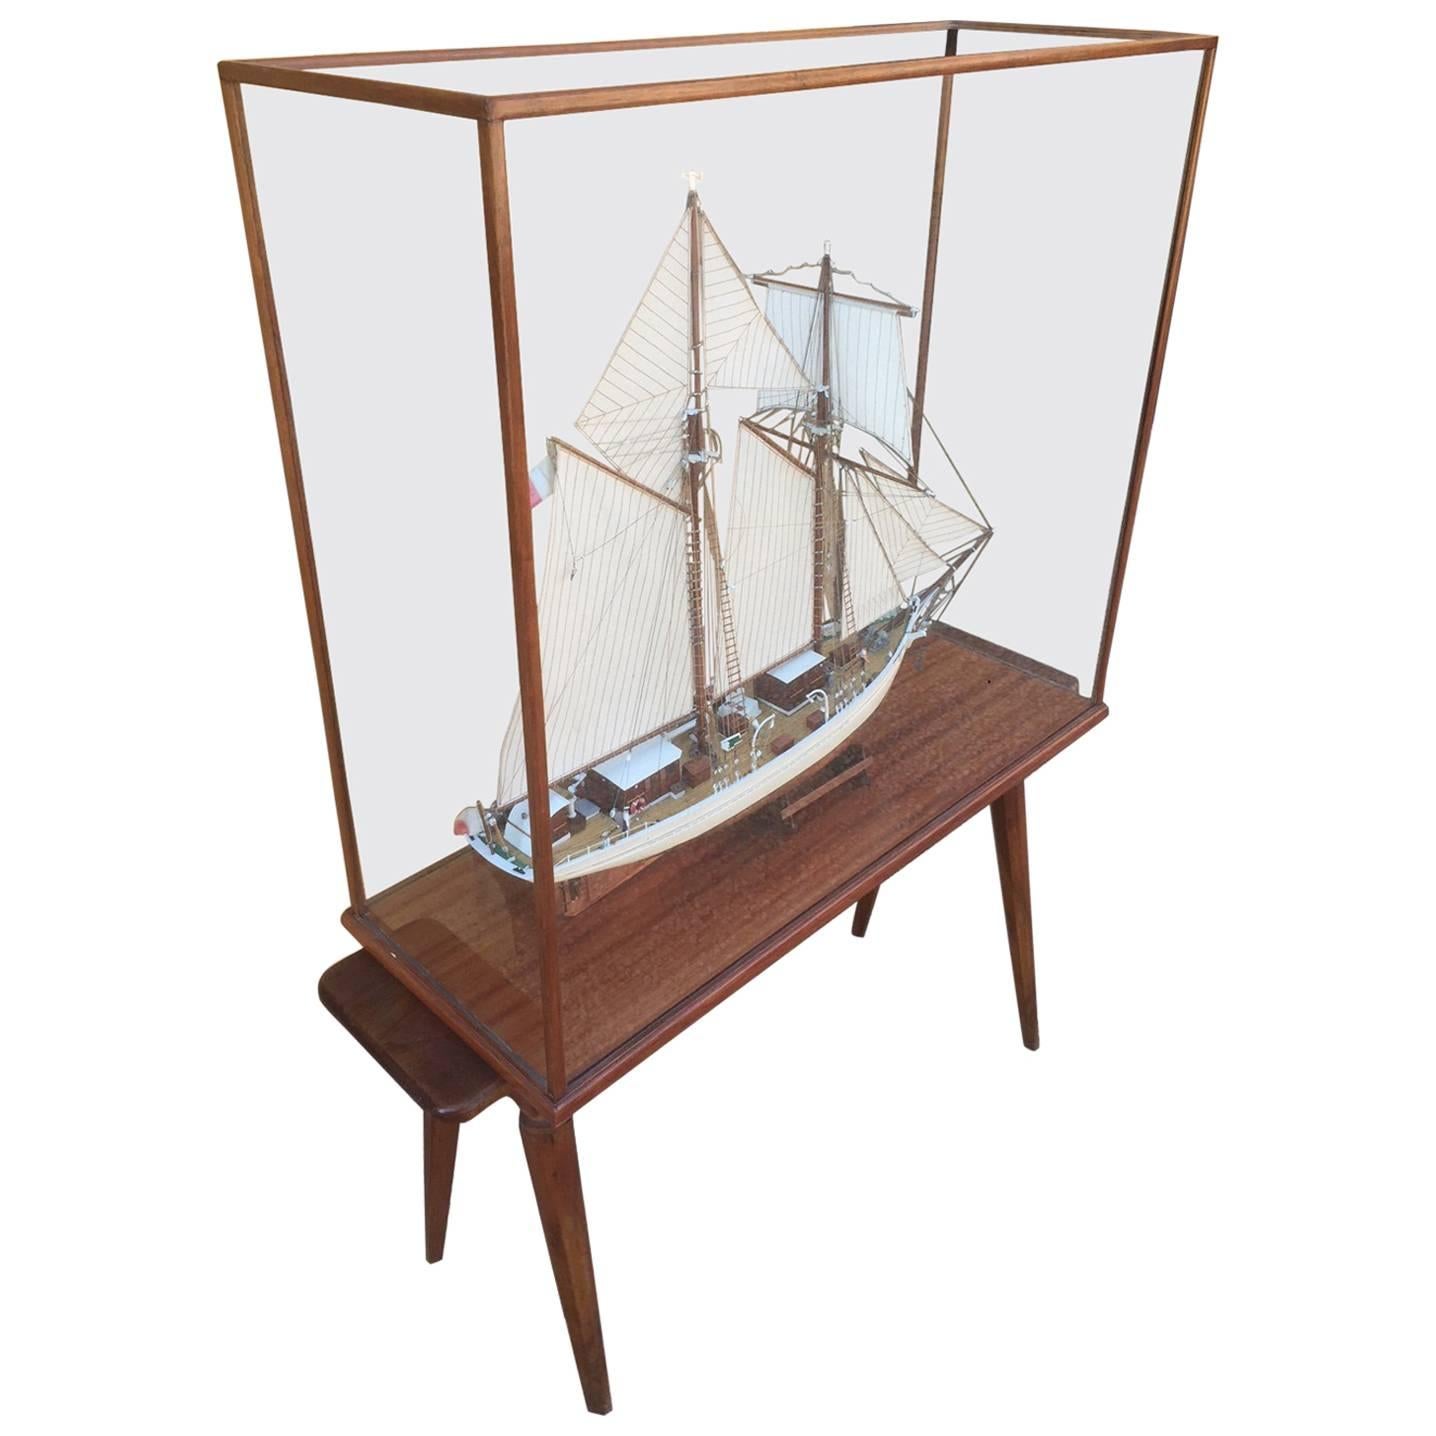 Sailing Ship Model Called "L'étoile" under Glass Protection, 1950s